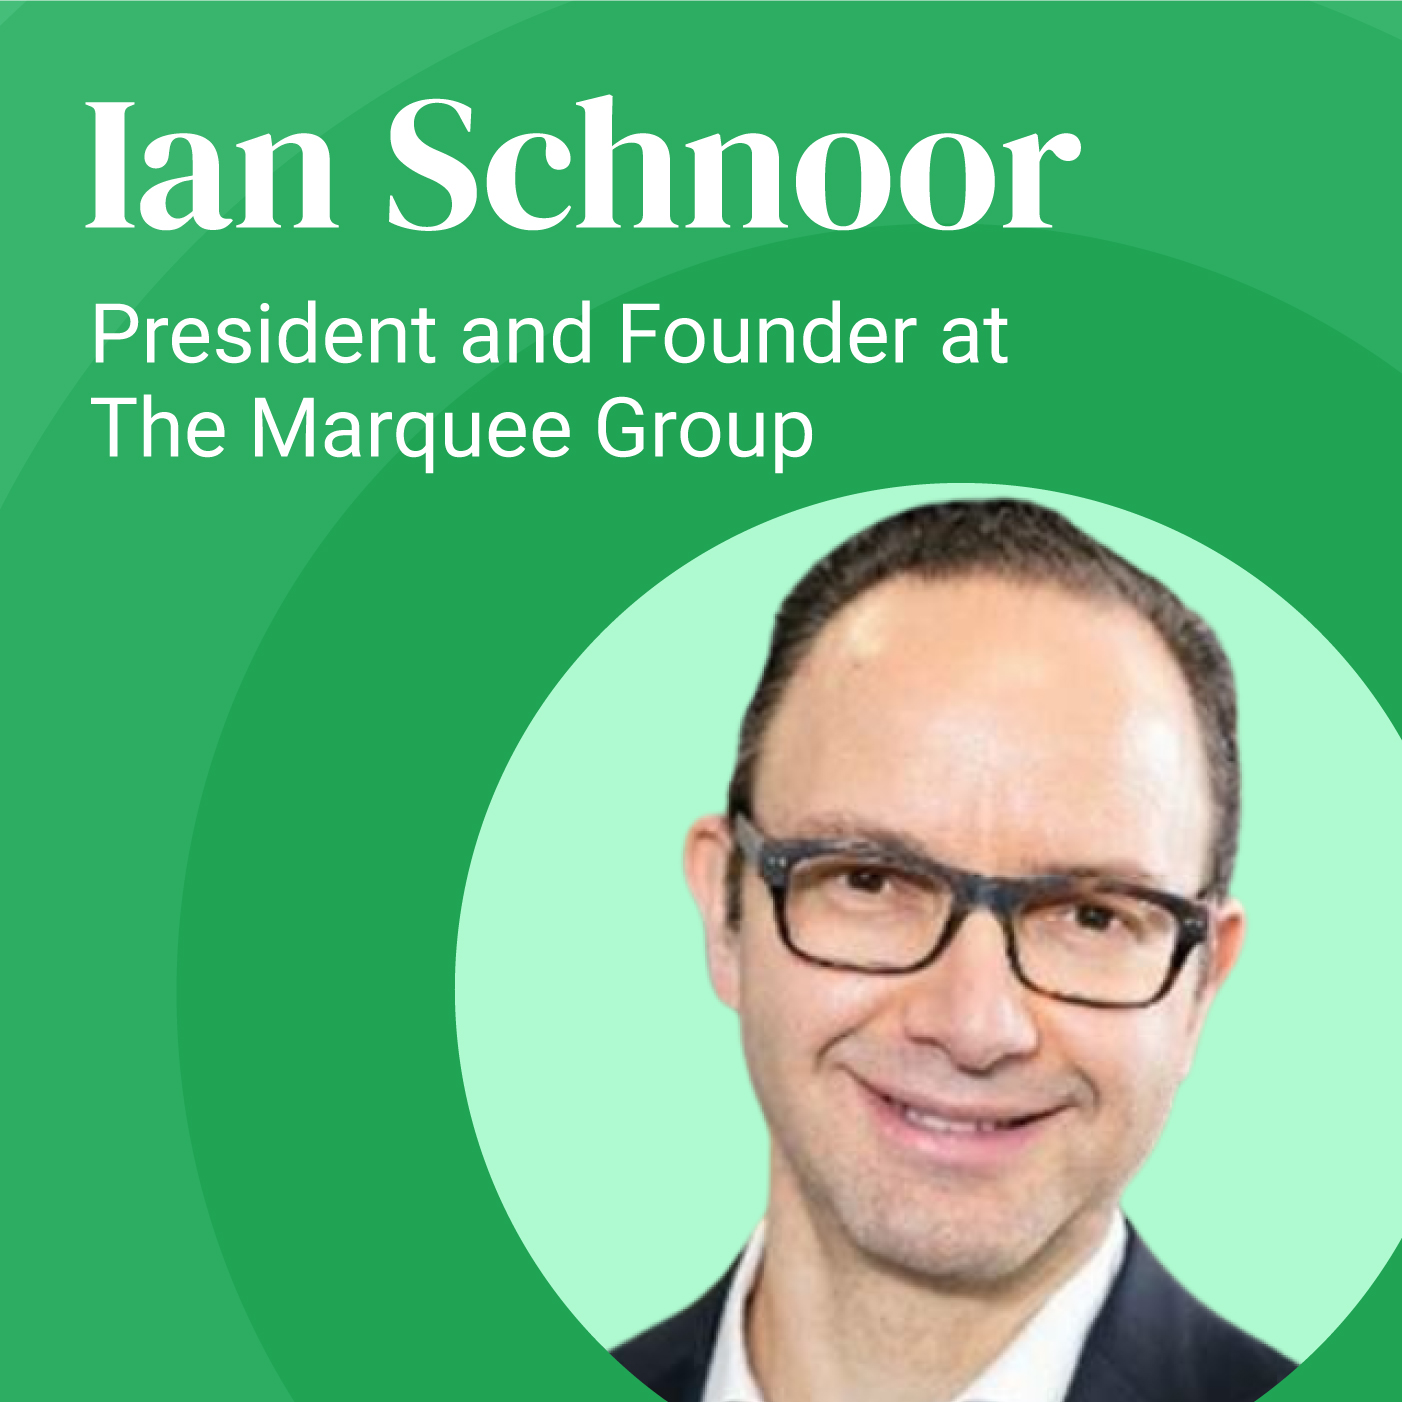 Level Up Your Financial Modeling | Ian Schnoor